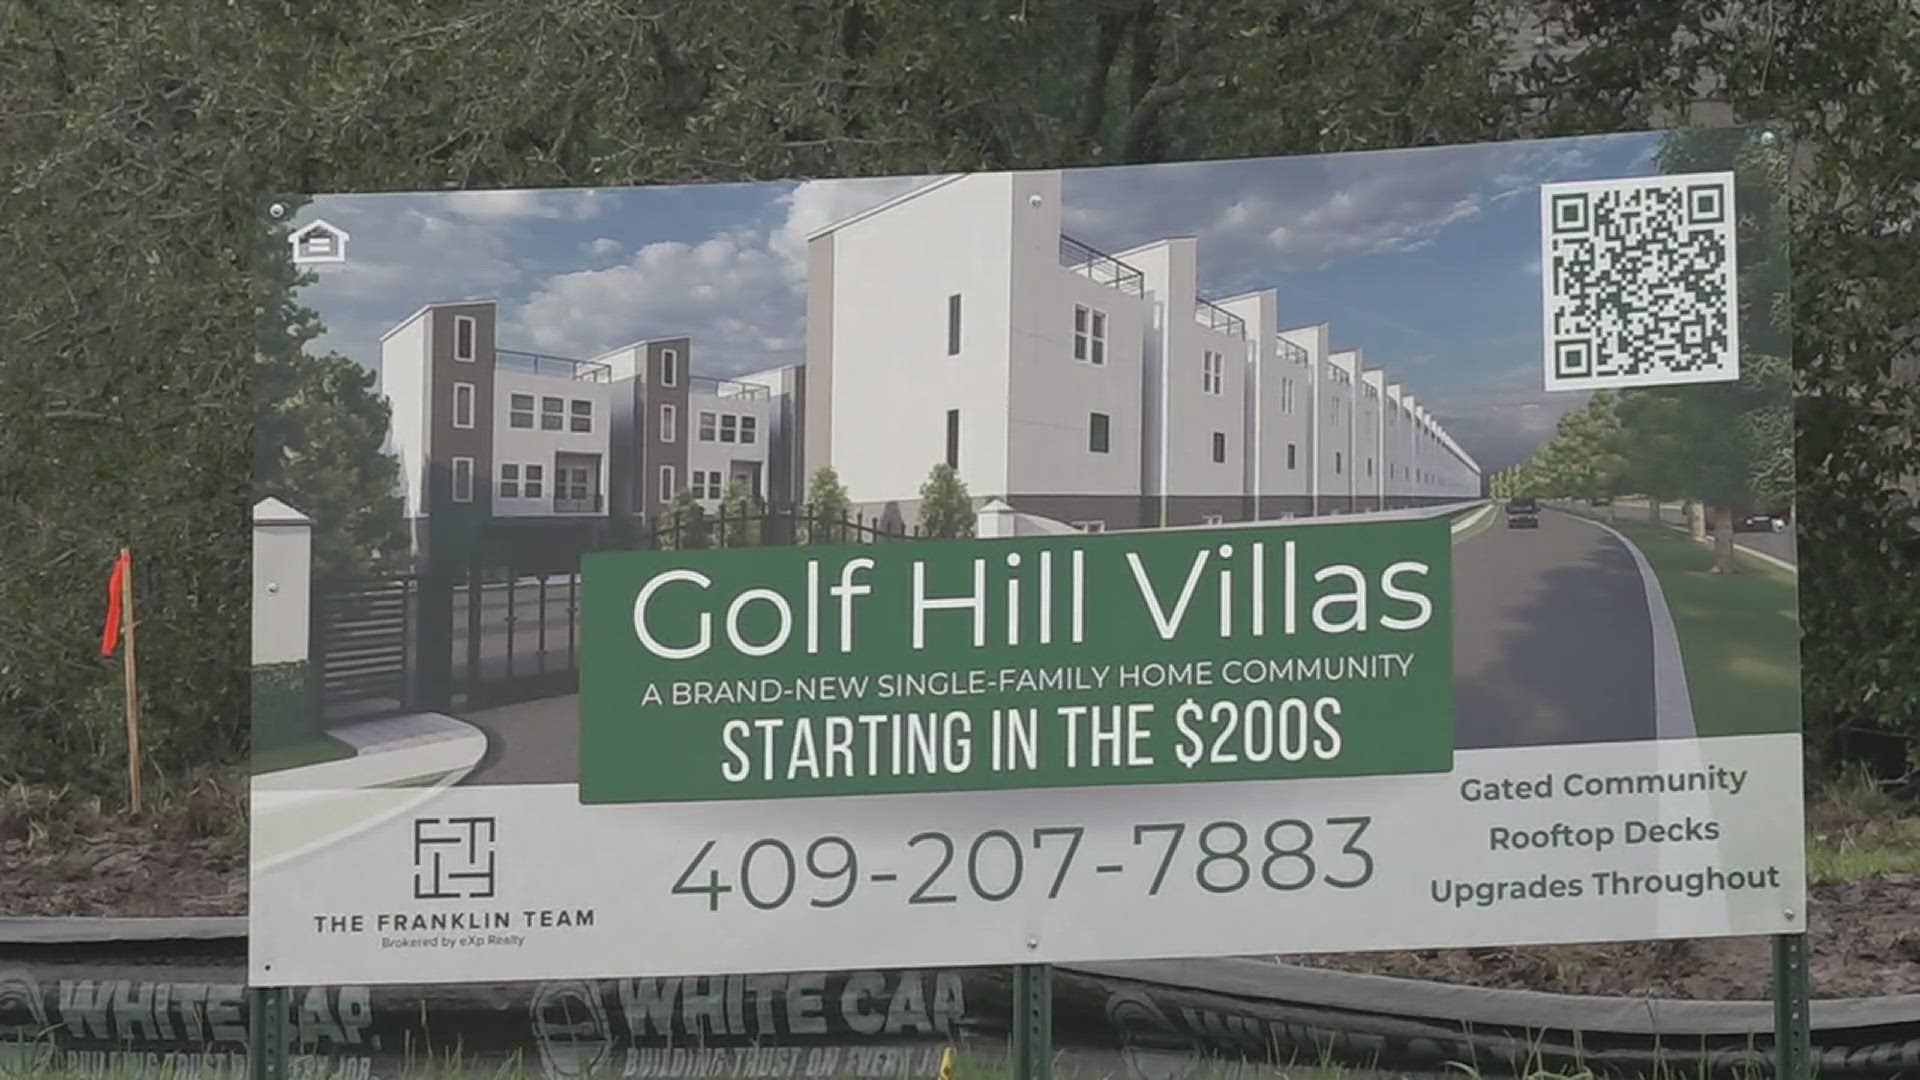 In March construction began on 70 new villas along the Babe Zaharias Golf Course in Port Arthur thanks to the recent industrial boom.